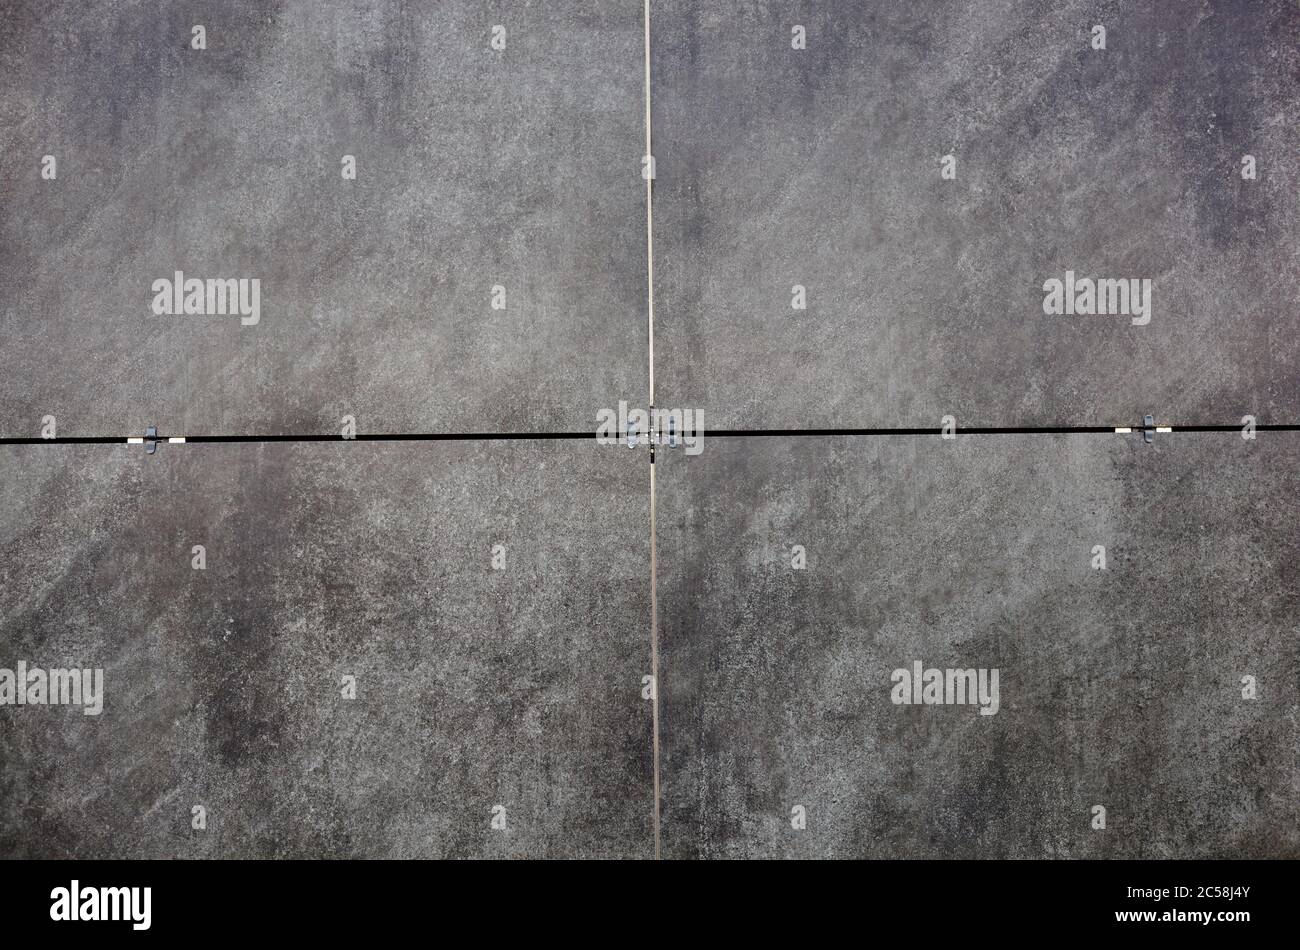 Concrete wall tile. Slate plate texture. Gray rough background Stock Photo